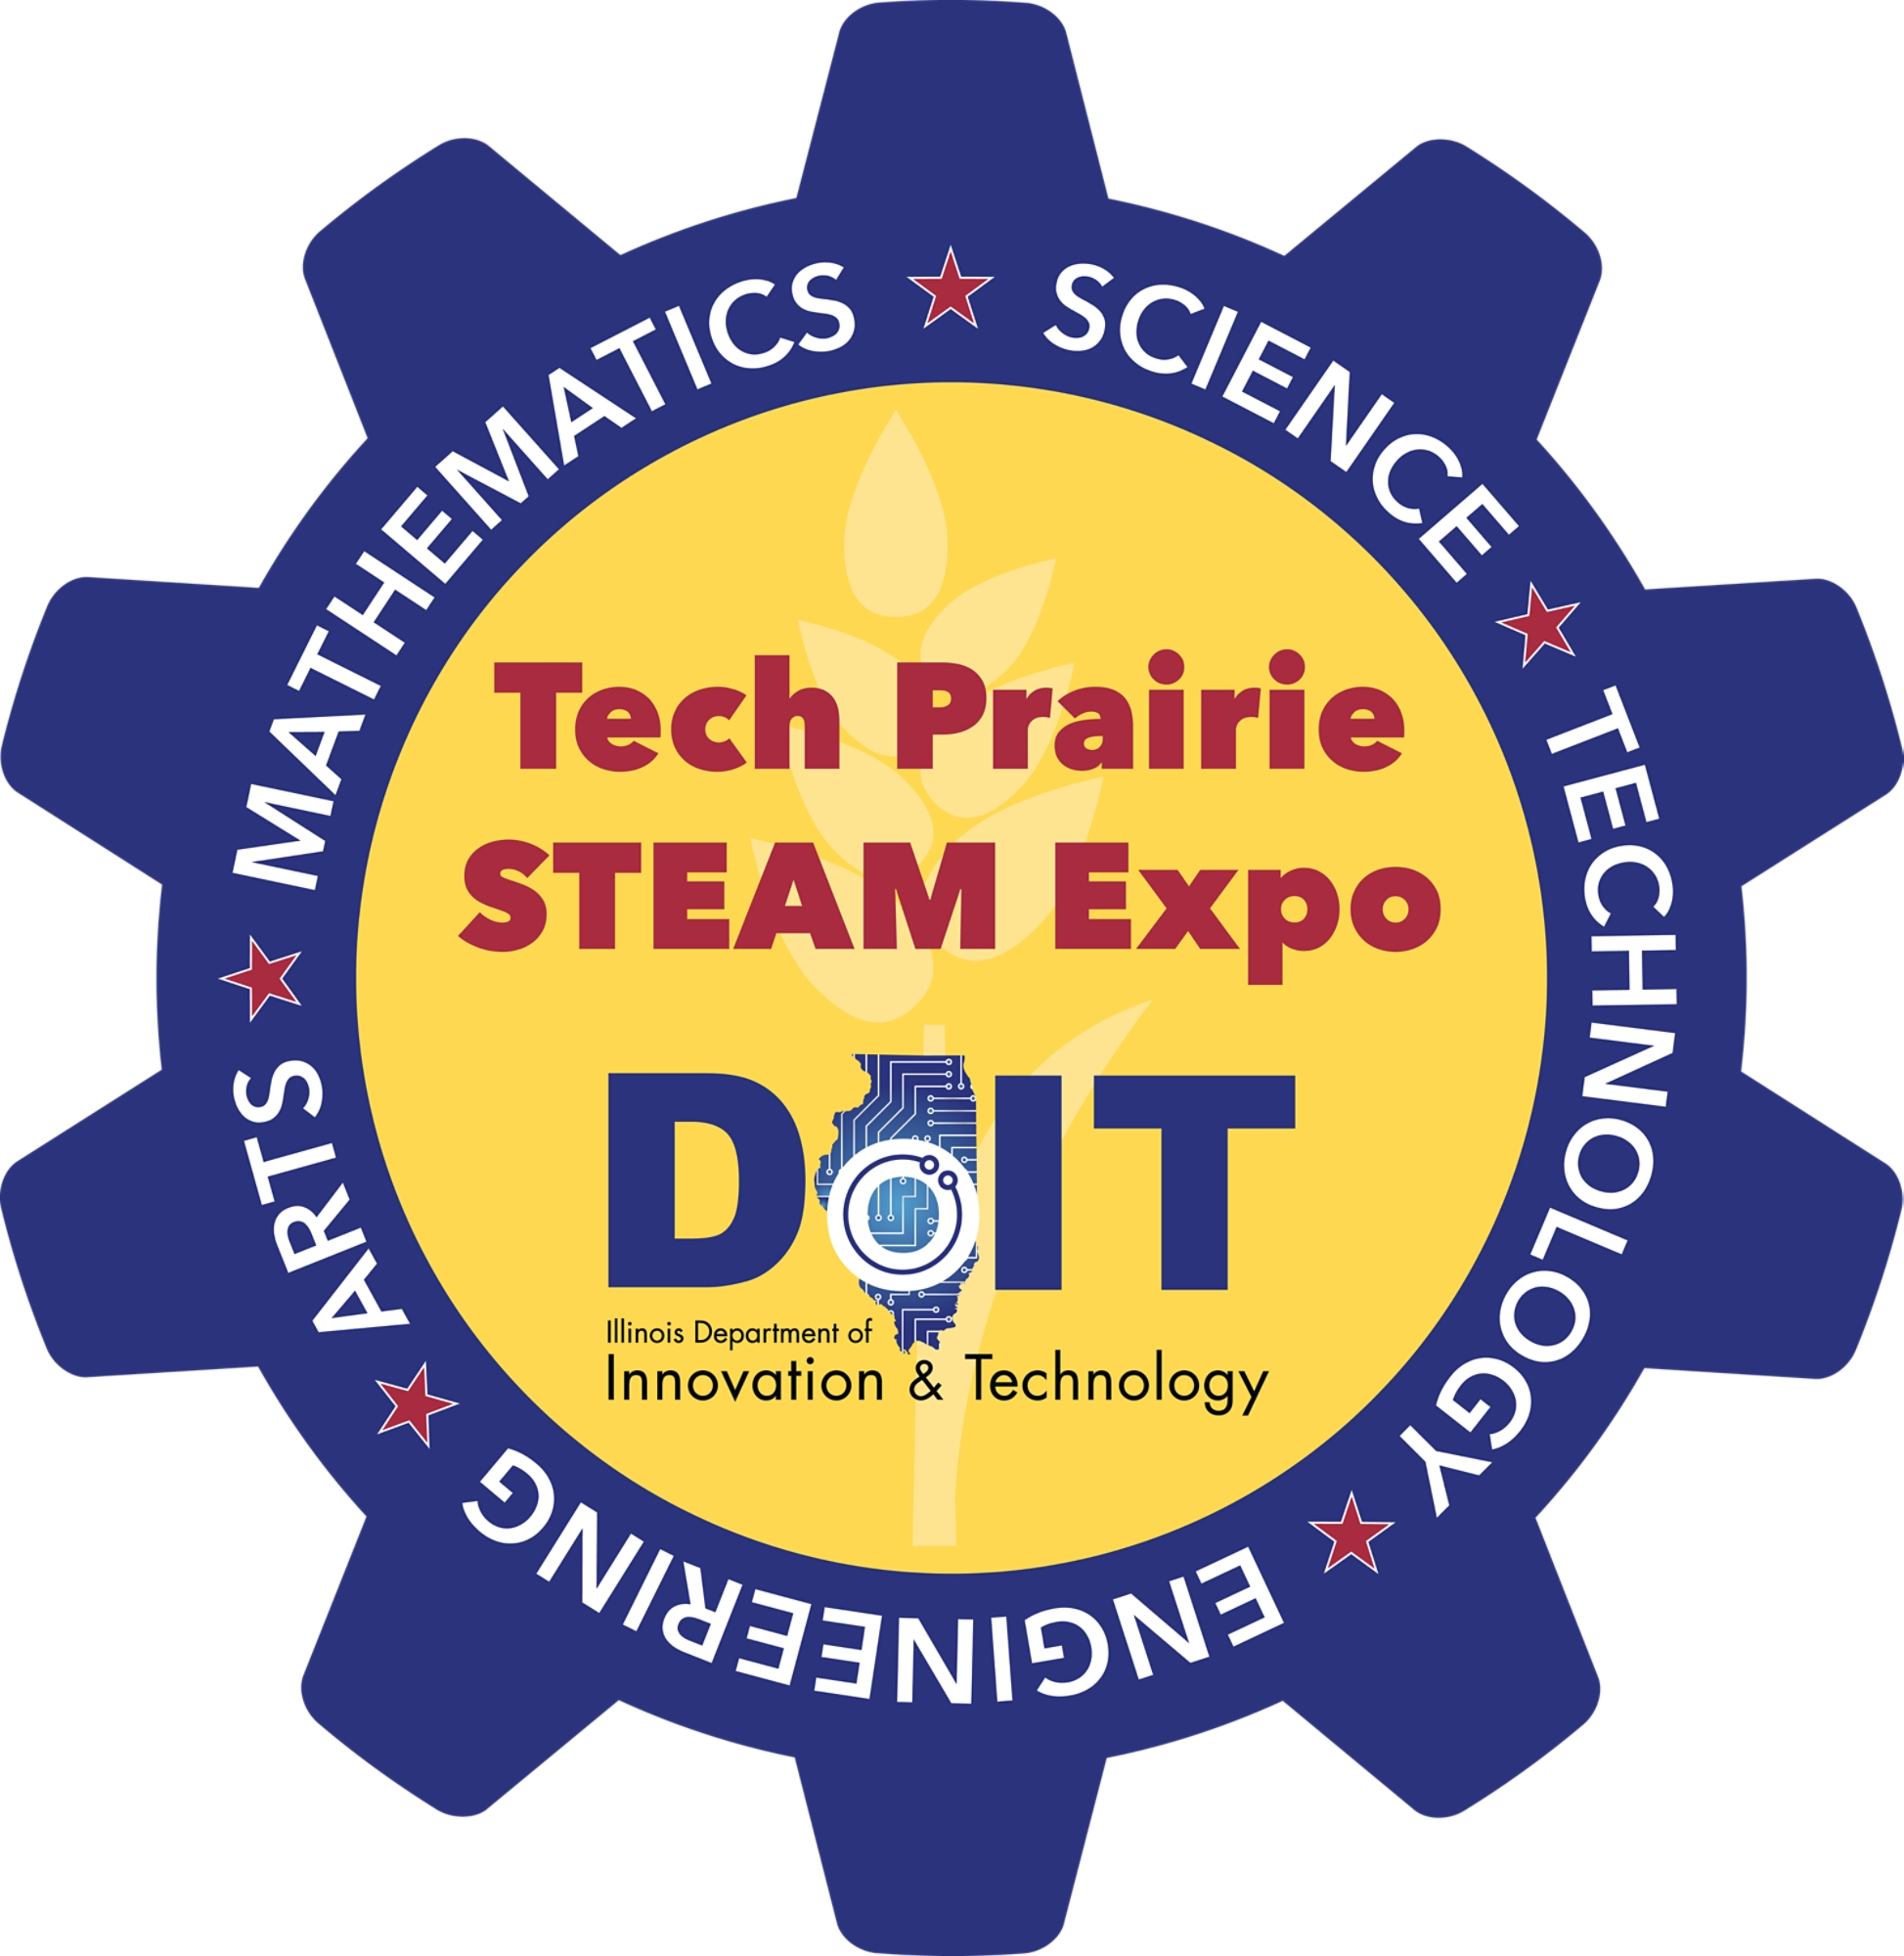 STEAM Expo hosted by Department of Innovation and Technology: Science, Technology, Engineering, Art, Mathematics.